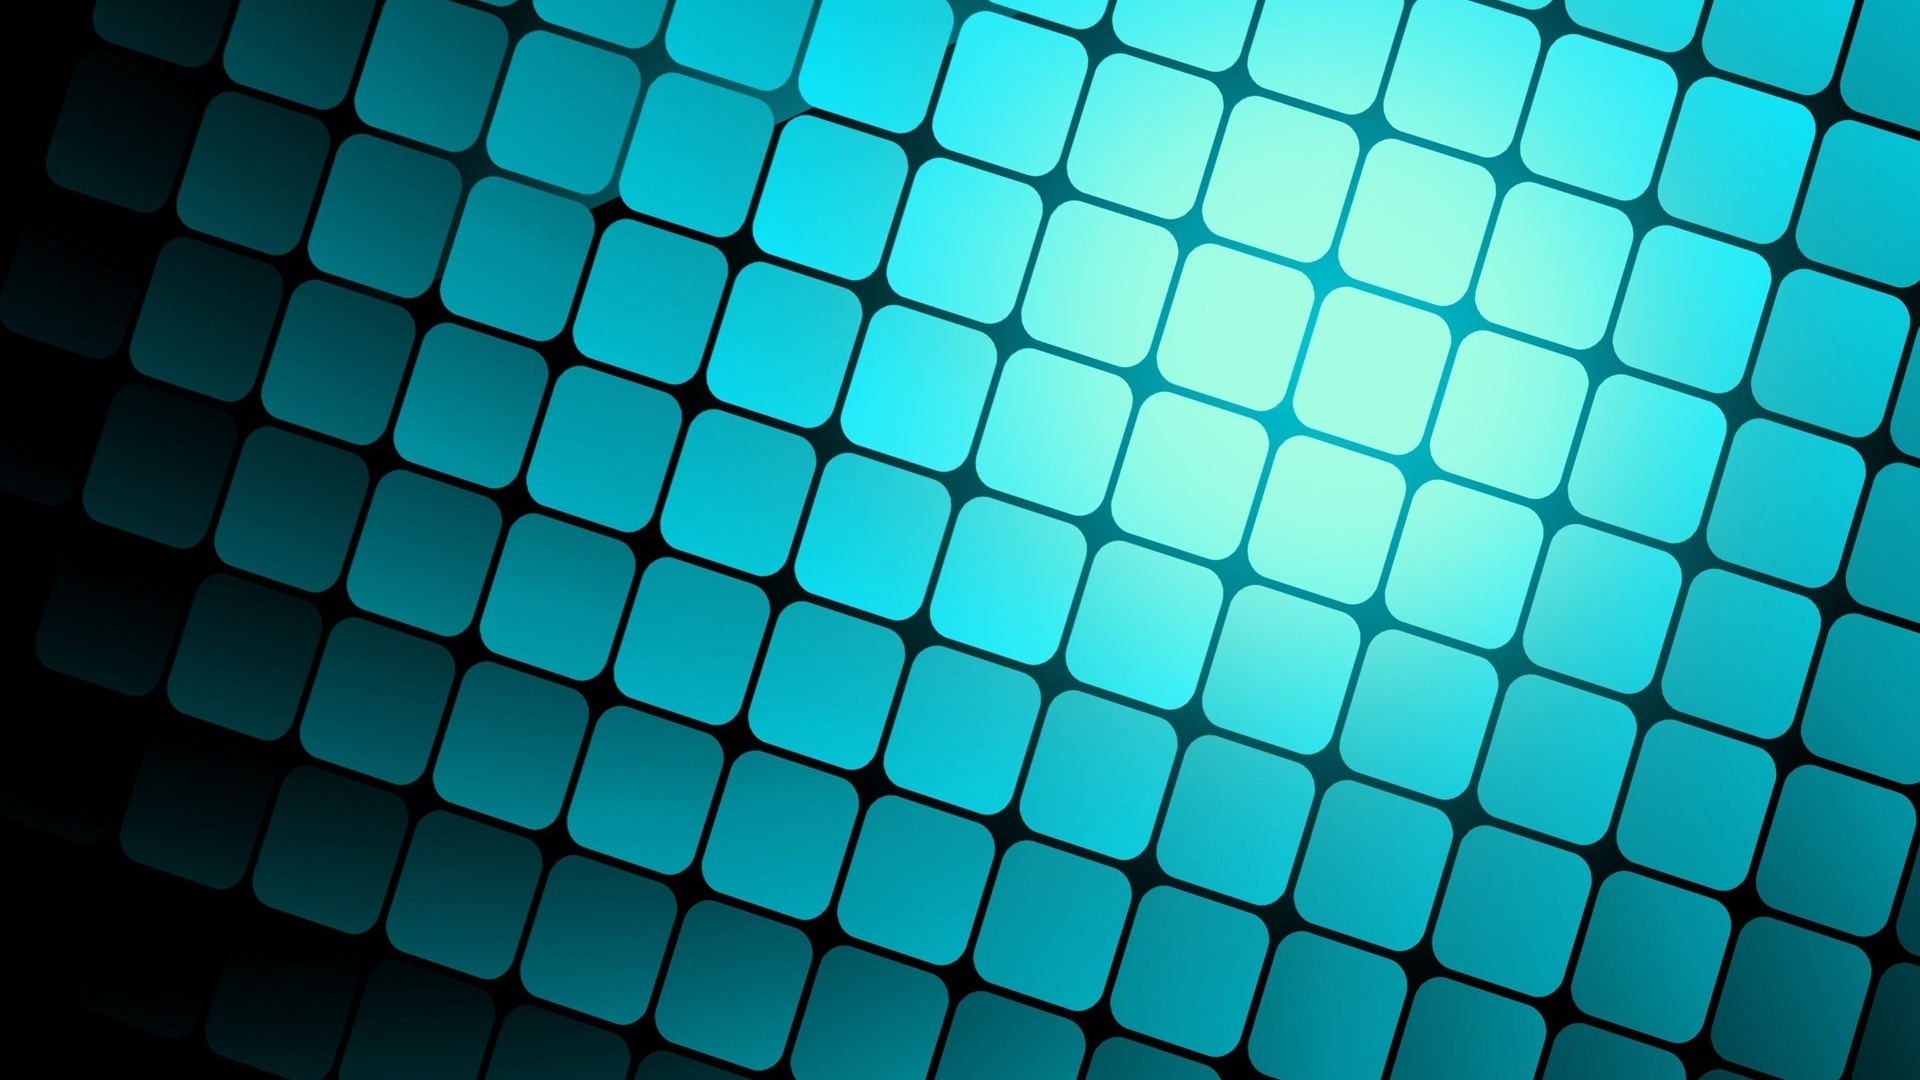 Abstract Turquoise 1920x1080